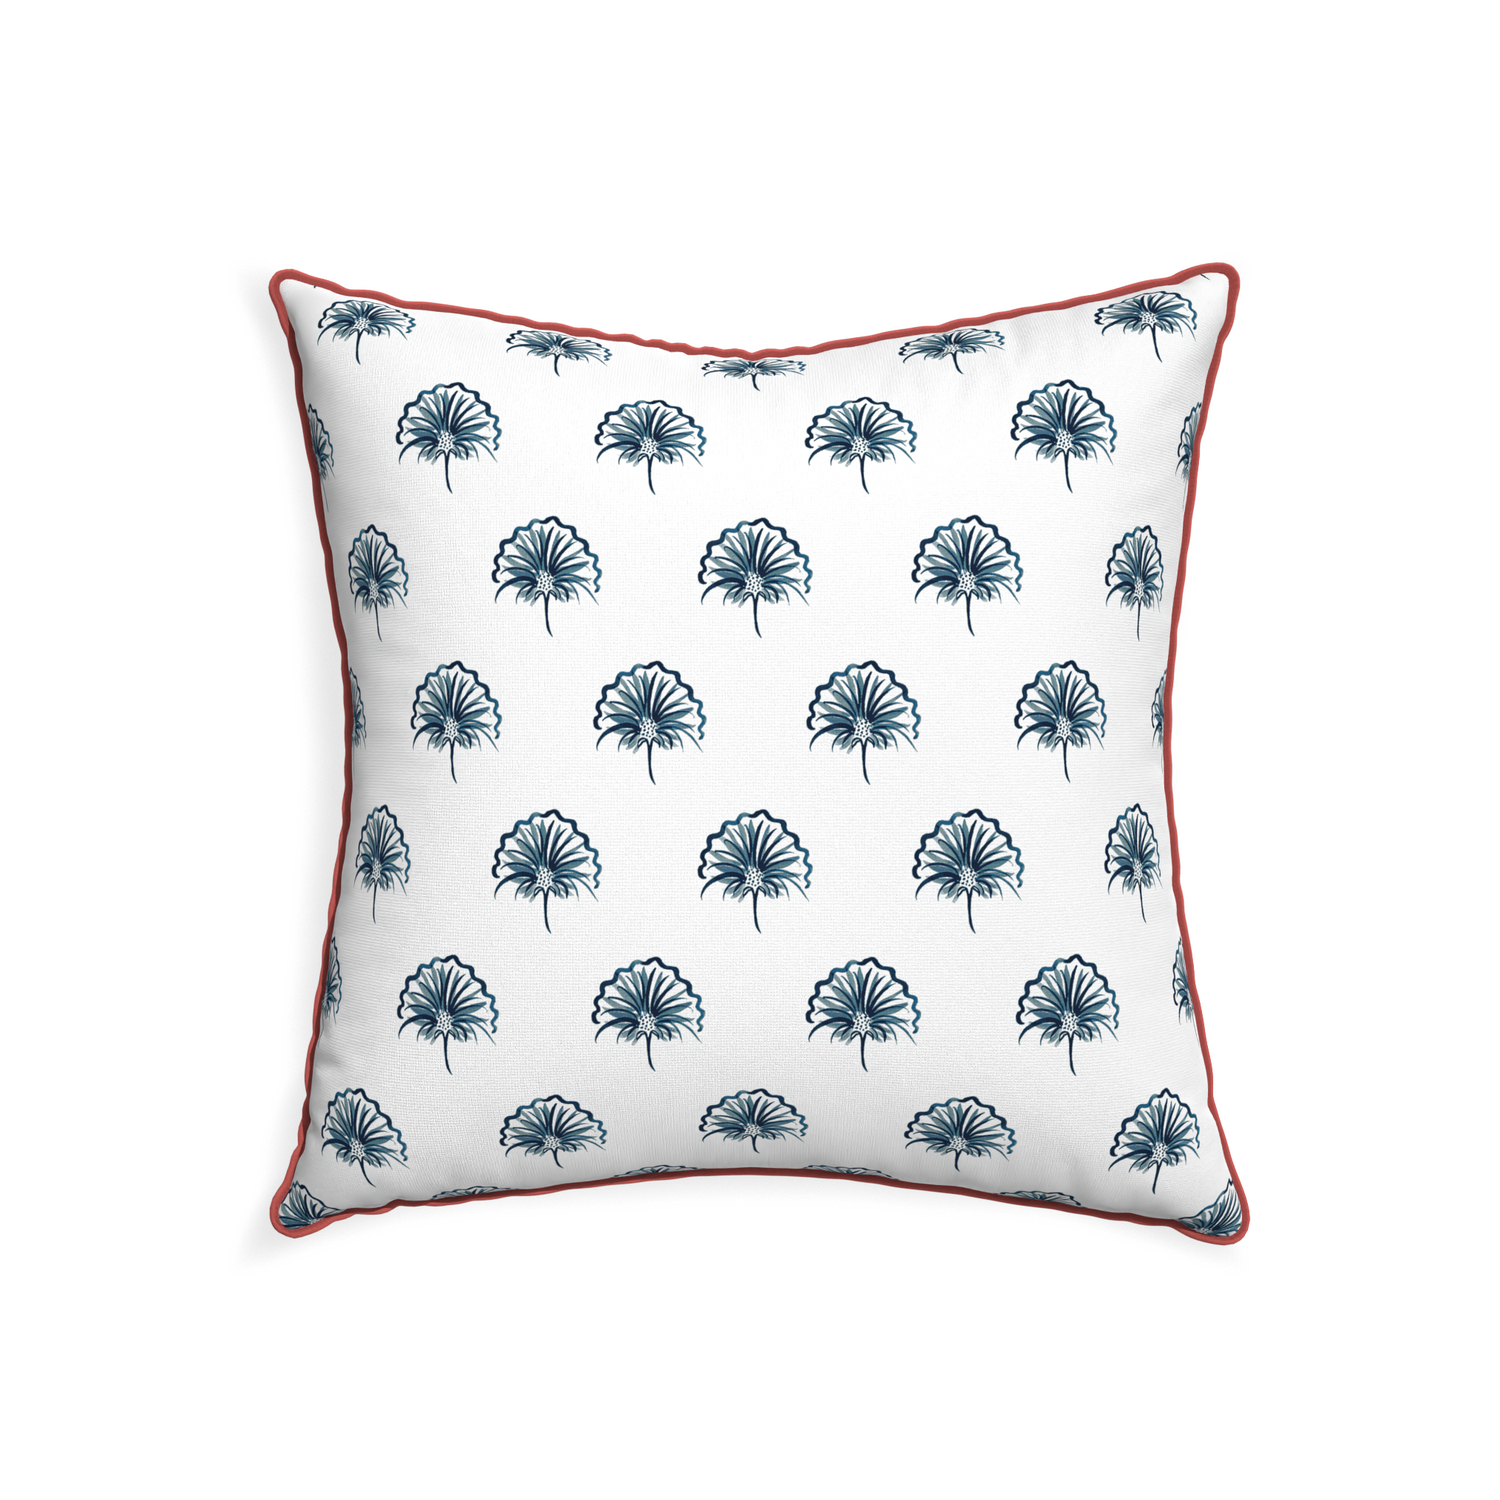 22-square penelope midnight custom floral navypillow with c piping on white background